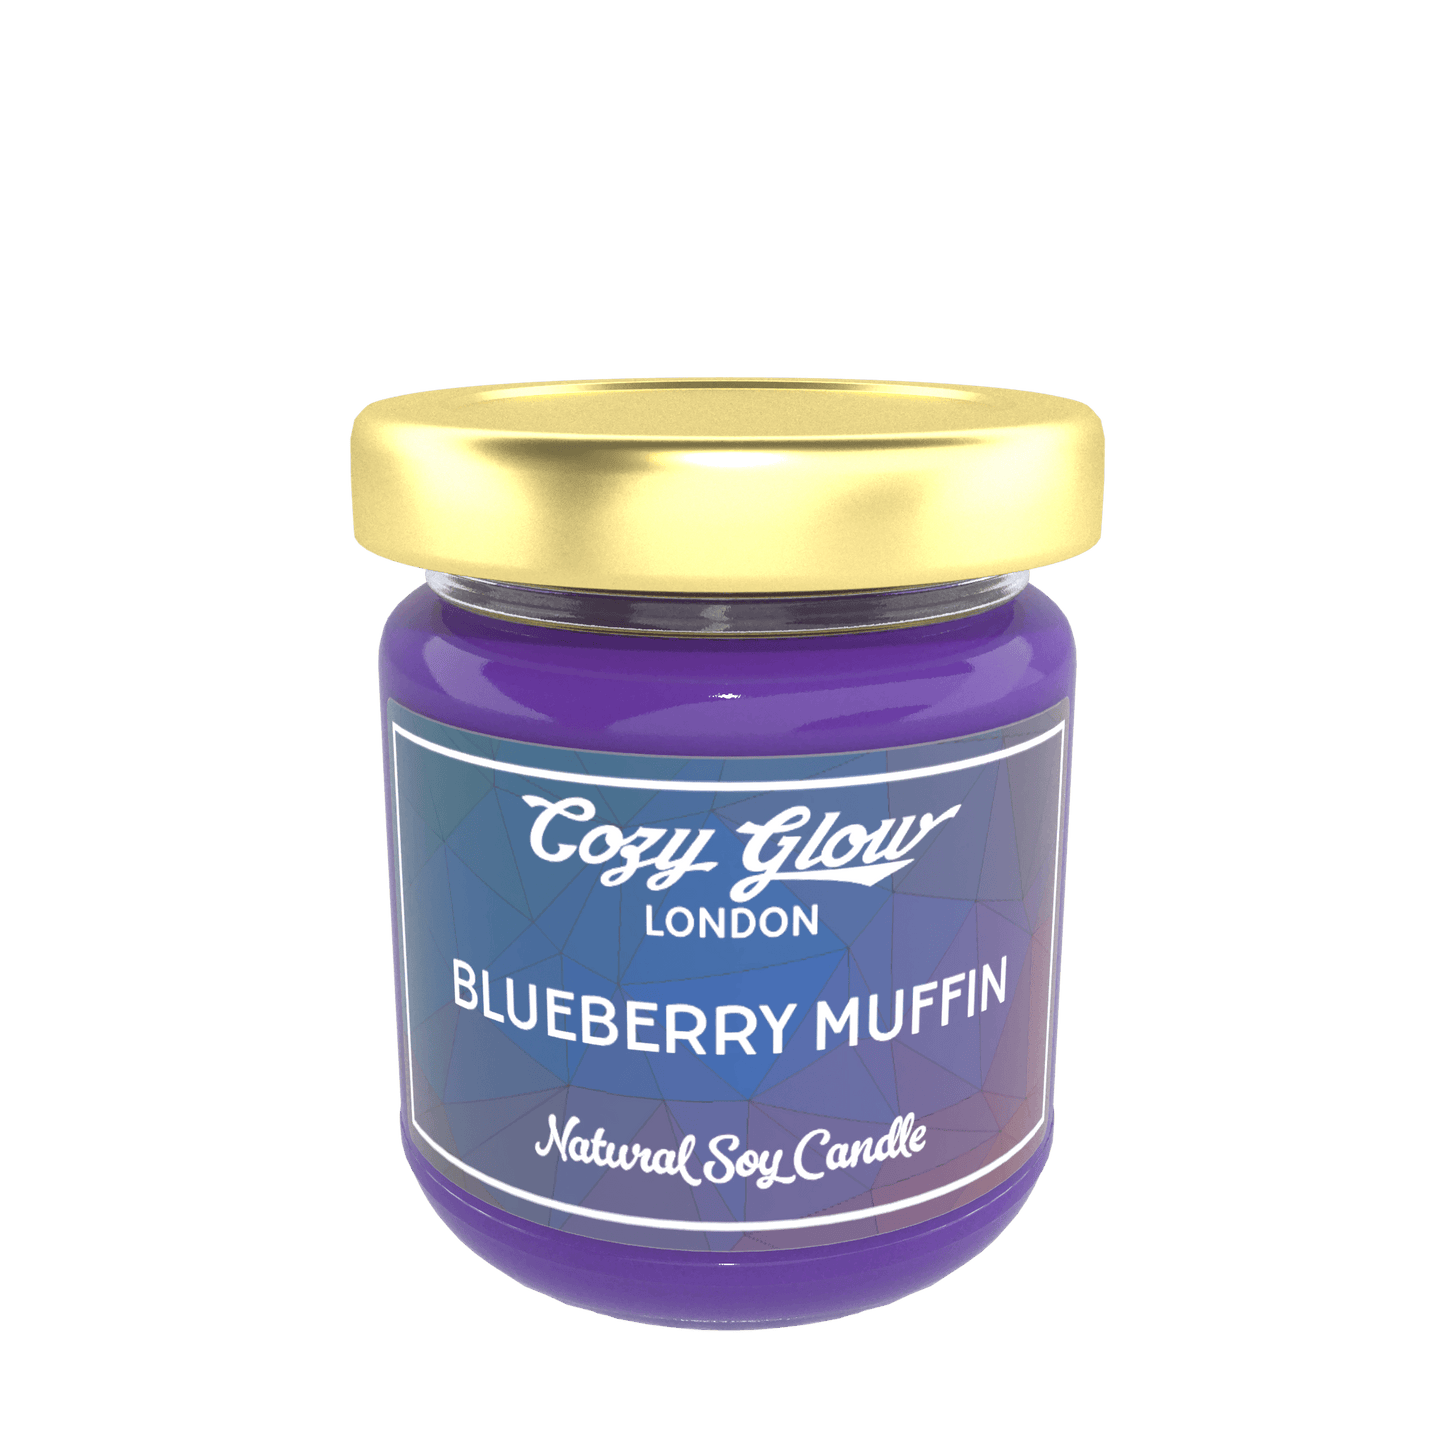 Cozy Glow Blueberry Muffin Regular Soy Candle